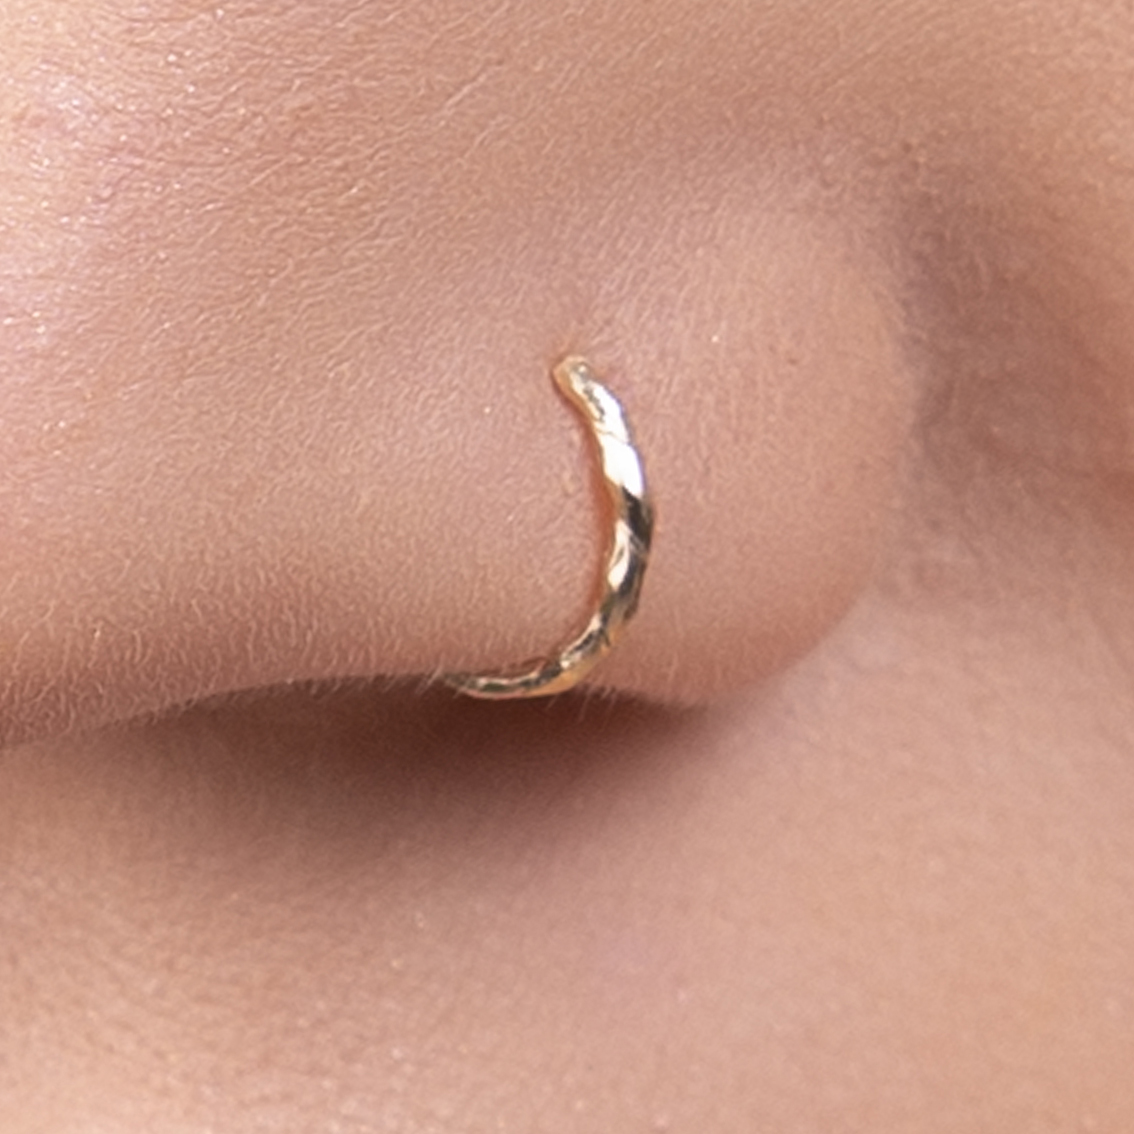 Septum Piercing Ring Gold Nose Hoop Thin Delicate India | Ubuy